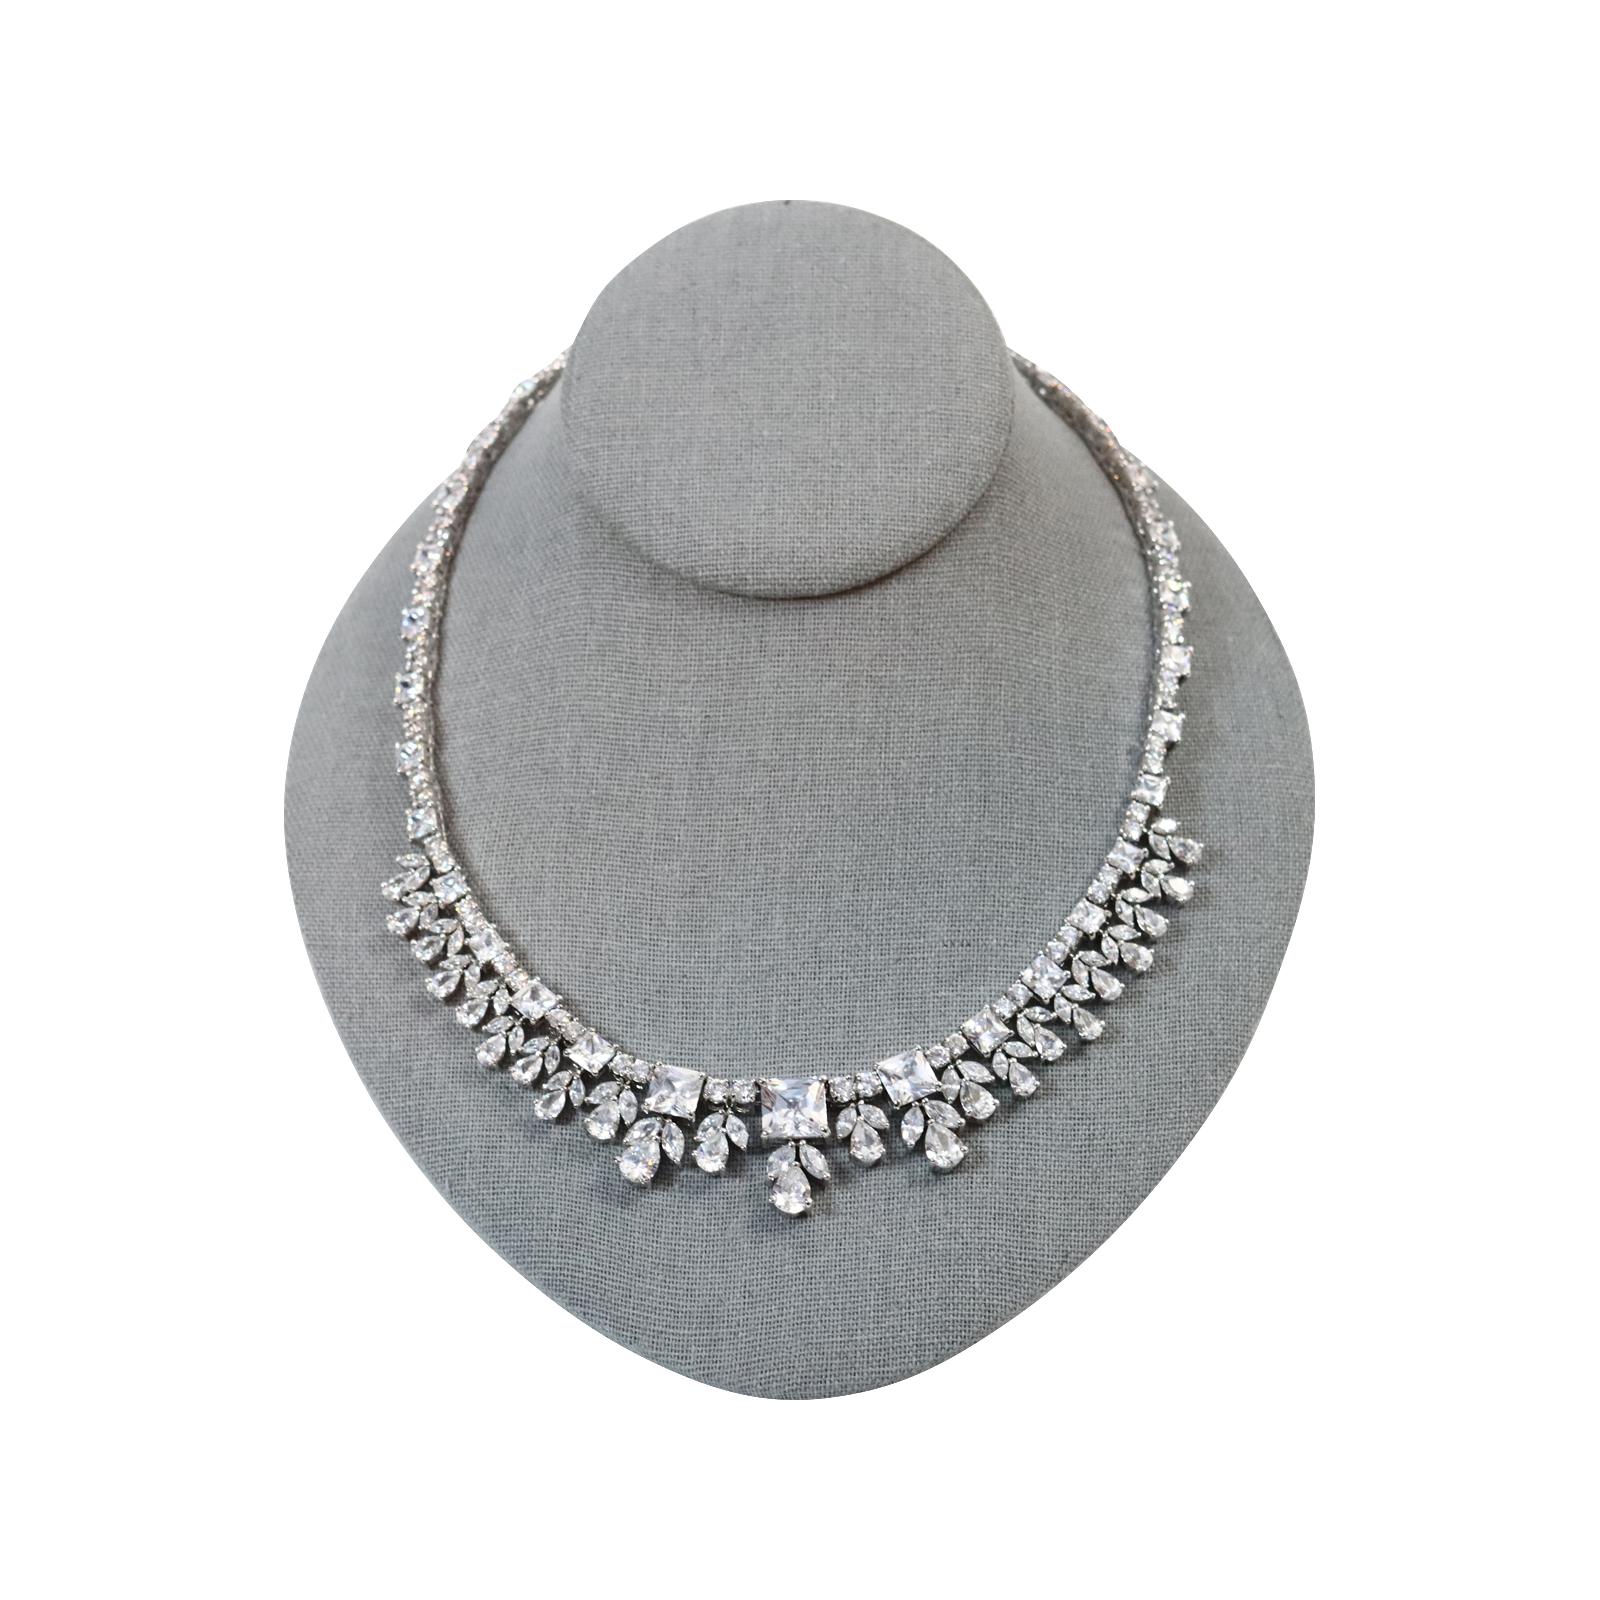 Vintage Diamante Dangling Pieces Necklace.  This is so special and if there was a way to describe a costume piece as looking real this would be it. These look like dripping diamonds. Gorgeous piece. I only curate for my site what I would wear. 